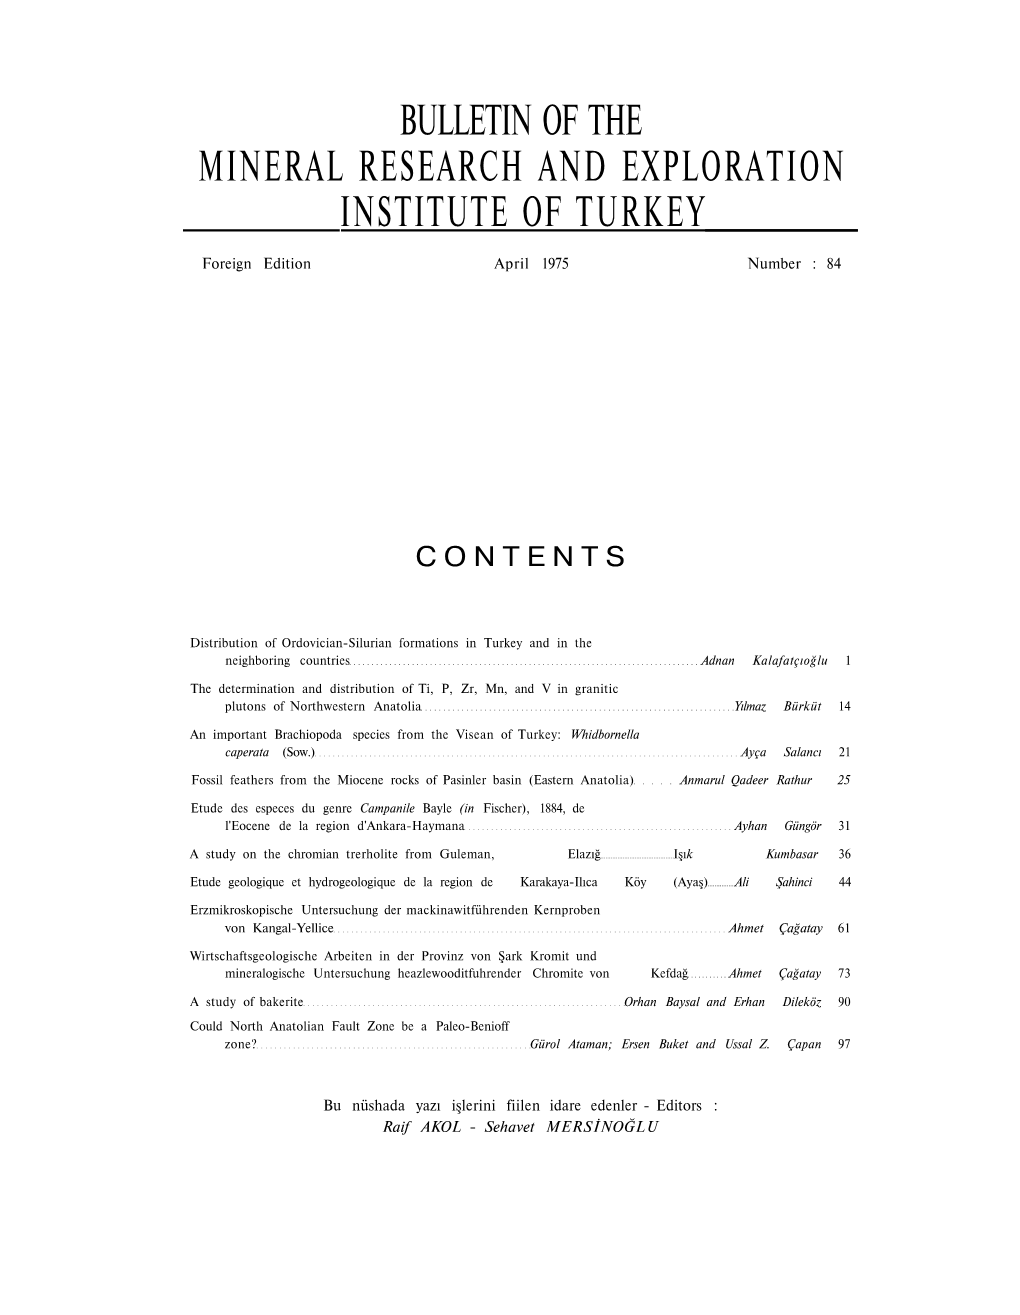 Bulletin of the Mineral Research and Exploration Institute of Turkey